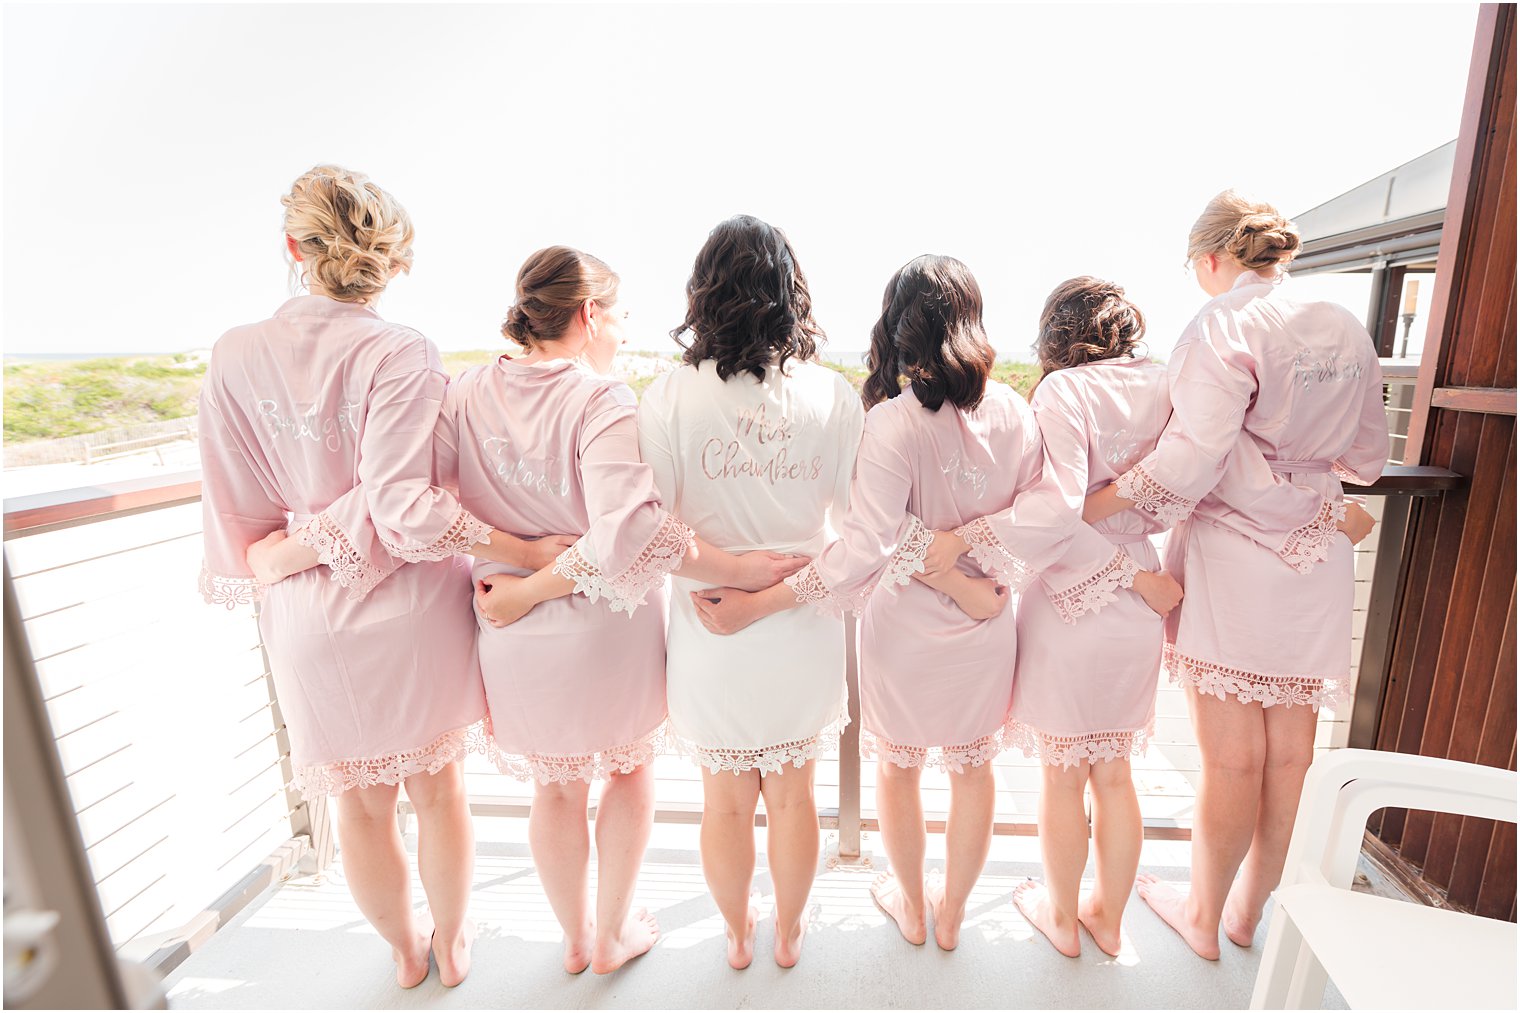 bride poses on deck with bridesmaids in matching pink robes